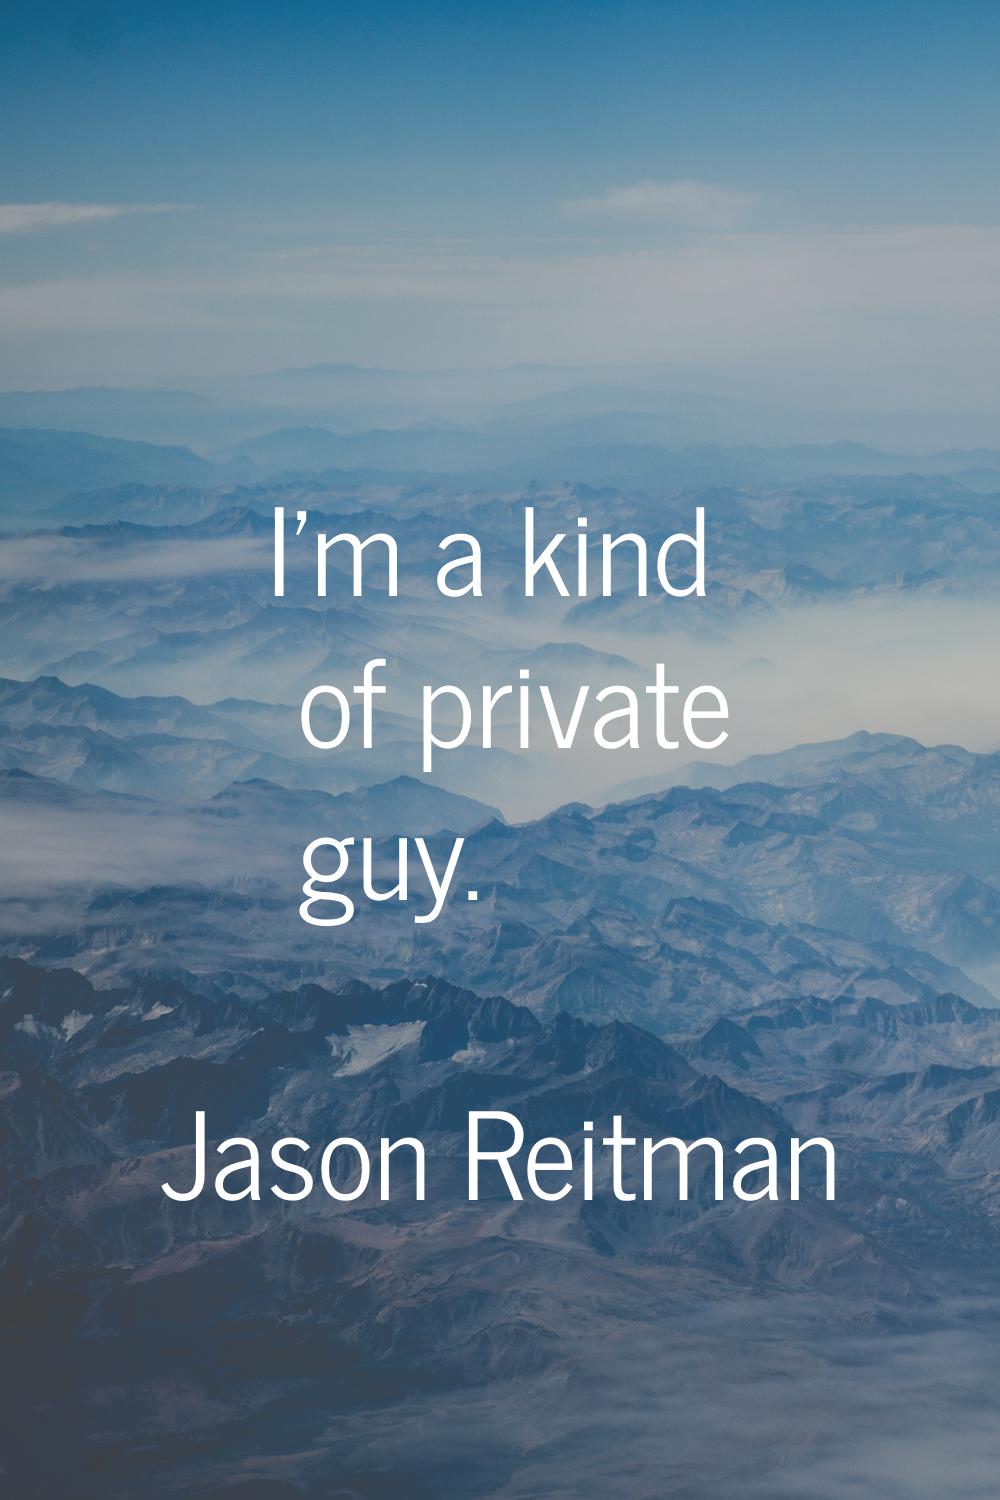 I'm a kind of private guy.